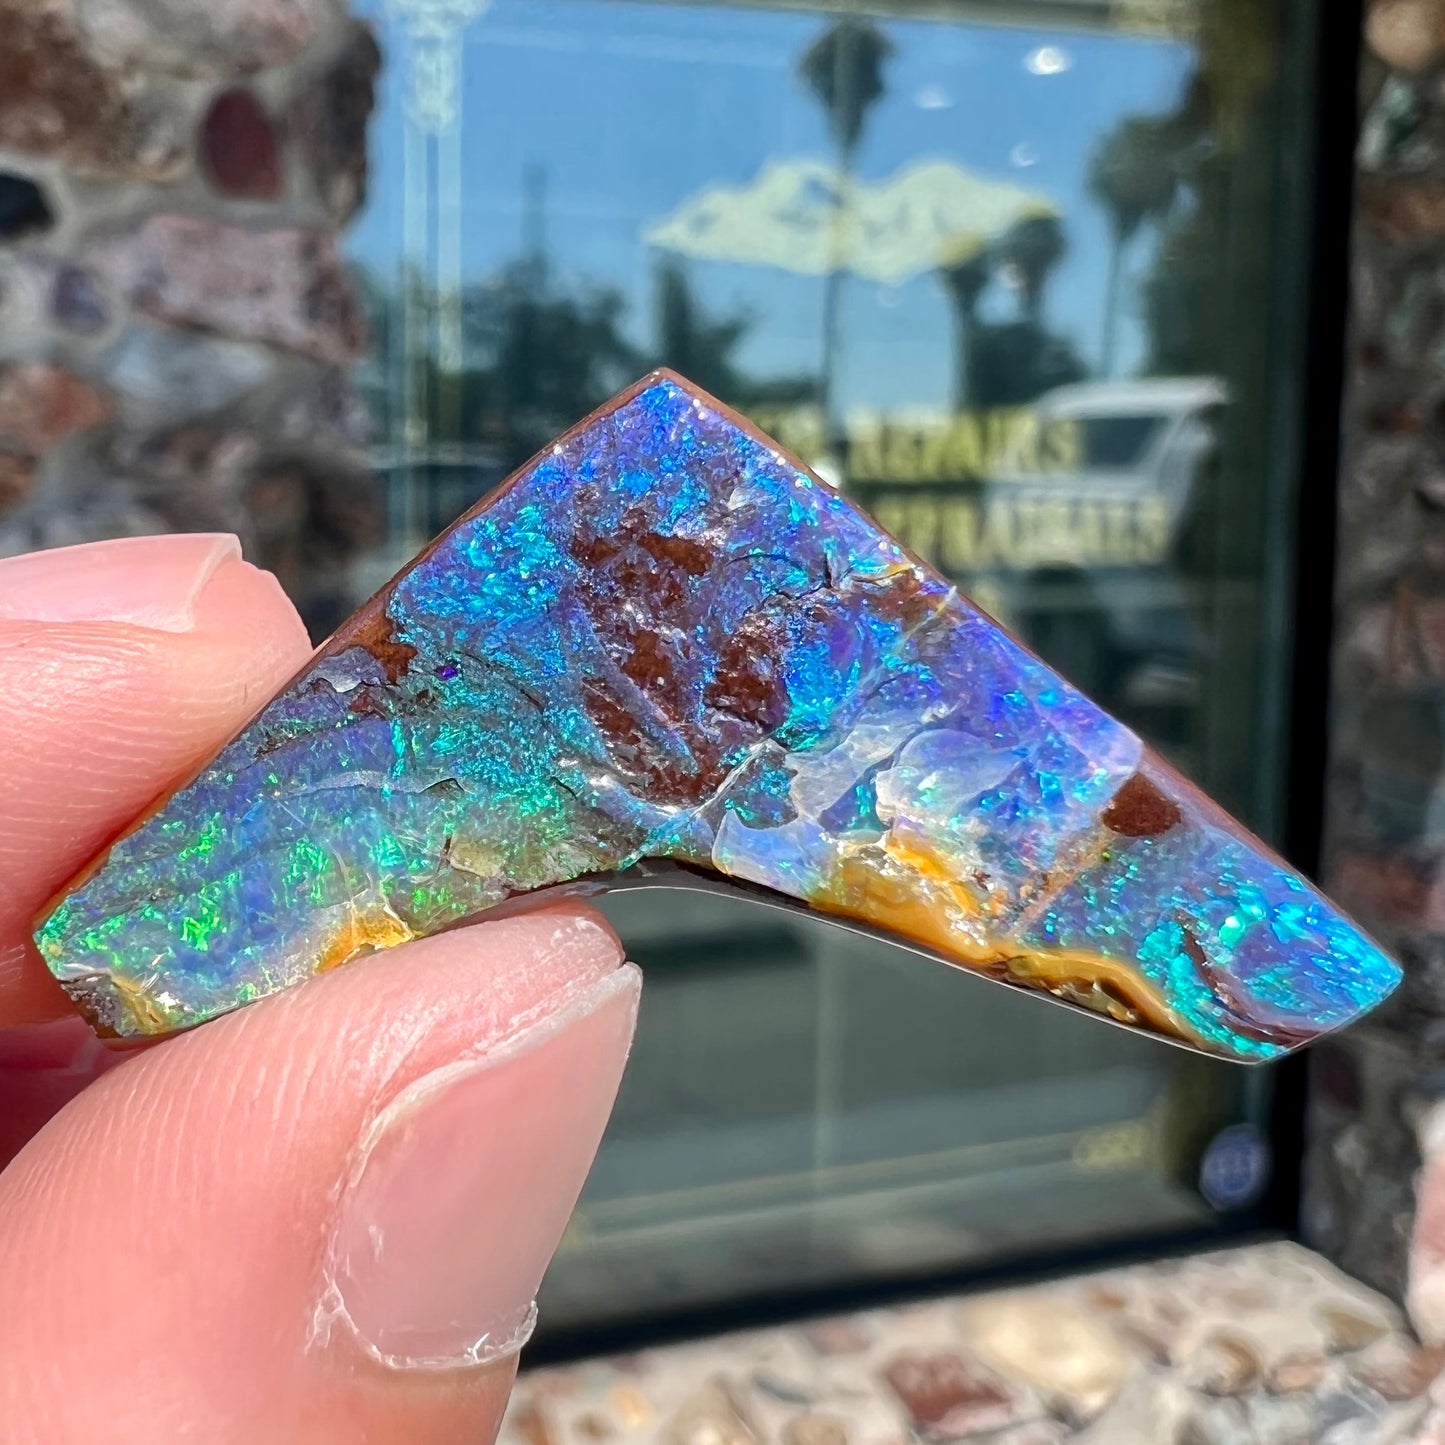 A loose, boomerang shaped boulder opal stone from Quilpie, Australia.  The stone is predominantly blue and green.